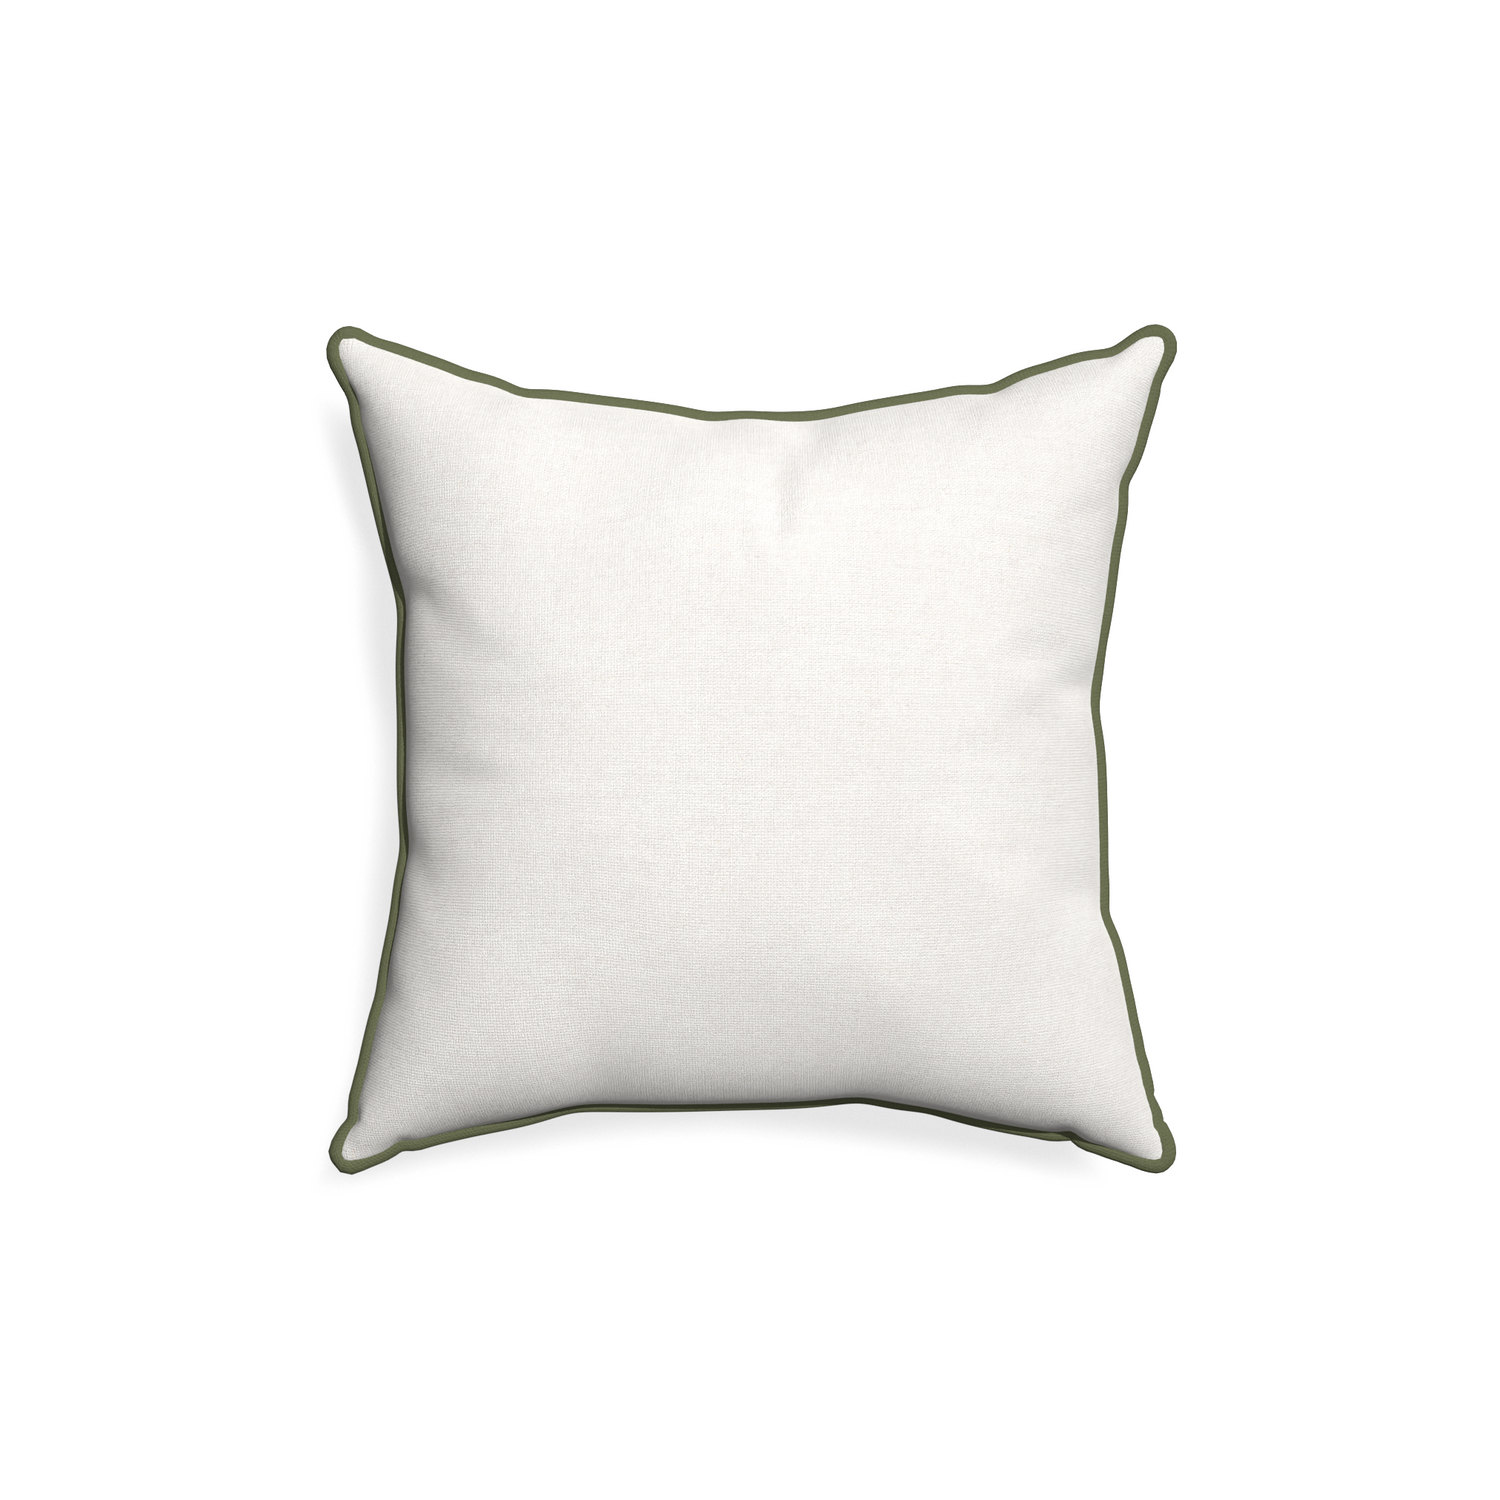 18-square flour custom pillow with f piping on white background